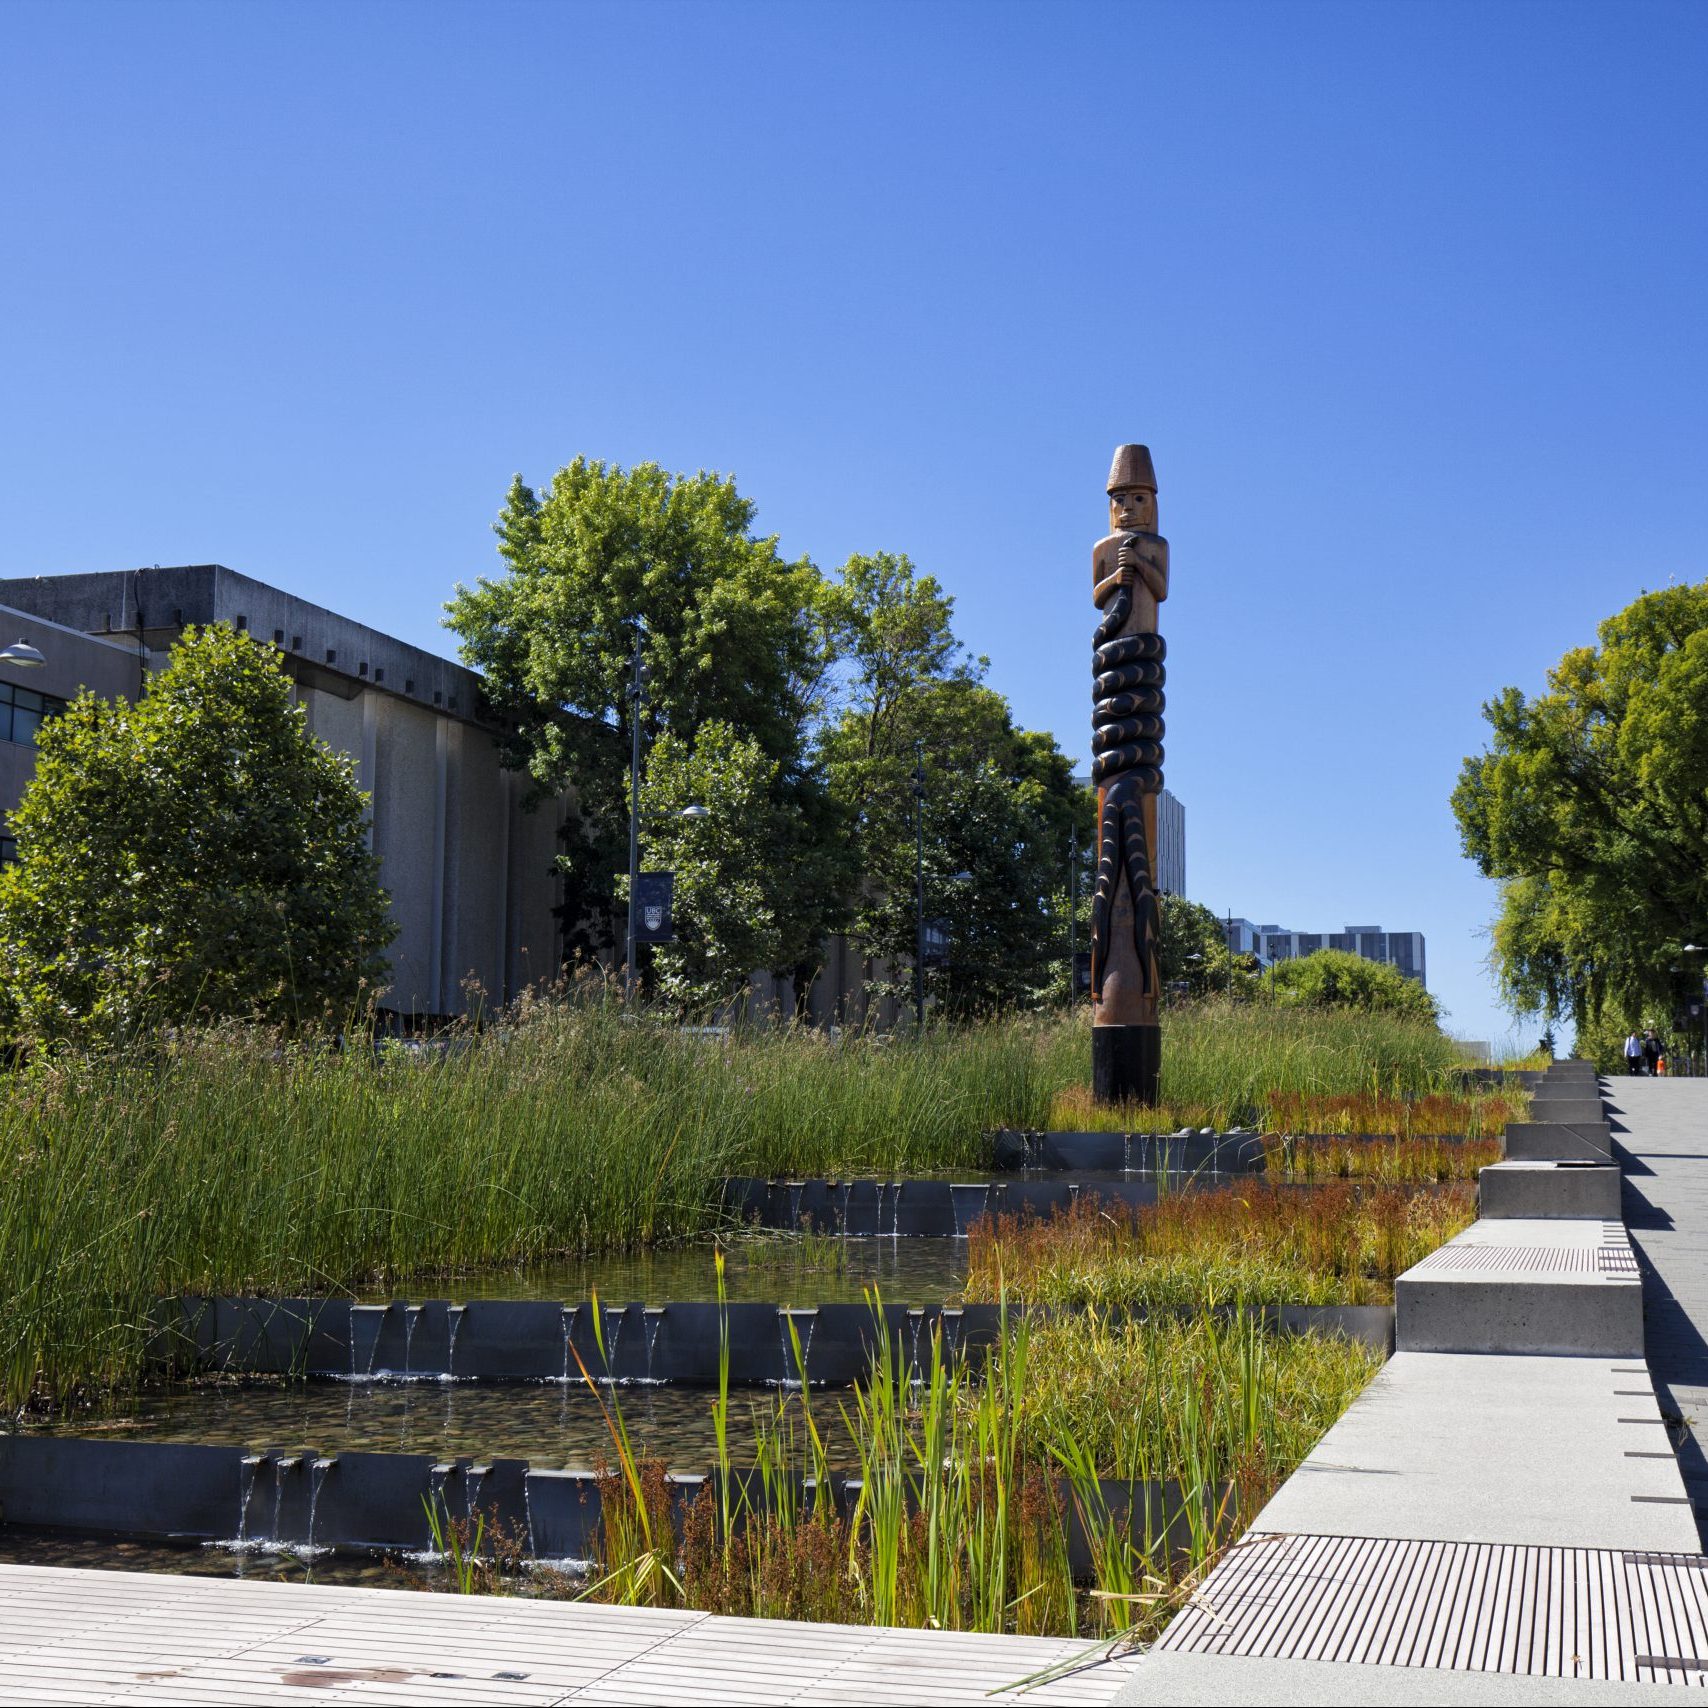 Totem pole and pond landscape at University of British Columbia, Vancouver, Canada